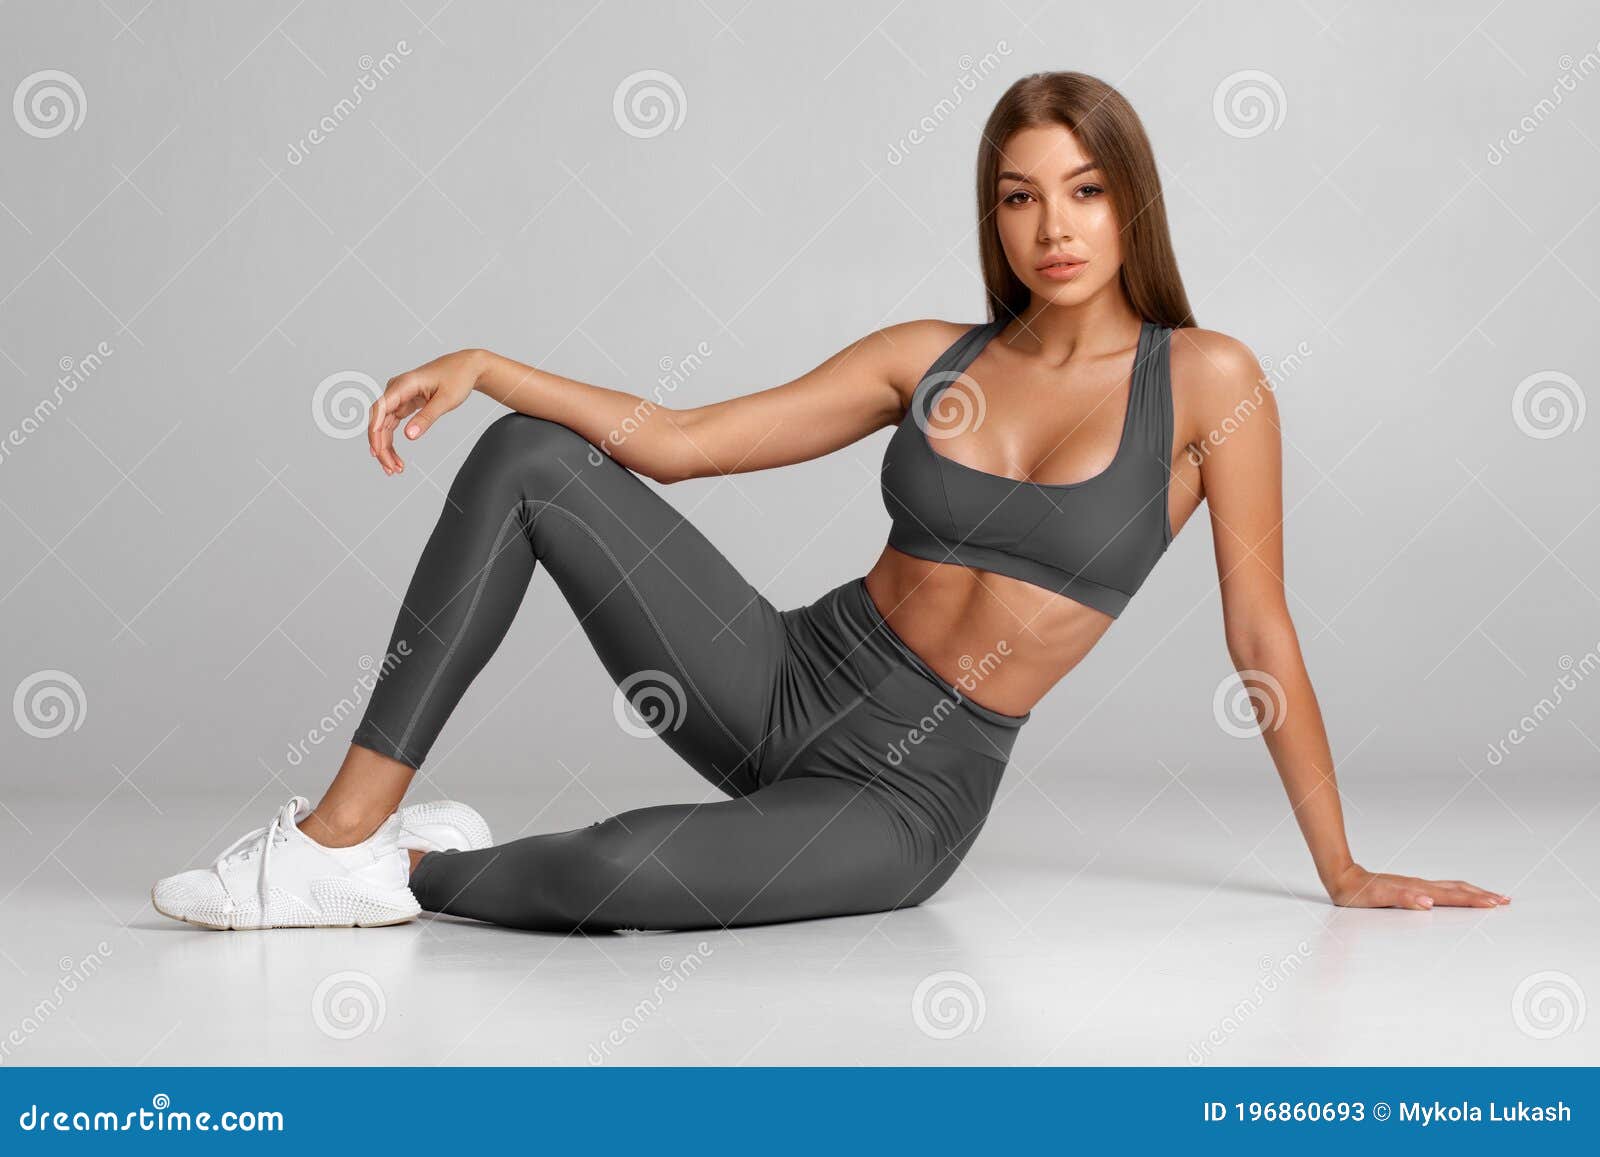 beautiful athletic girl, fitness woman on gray background